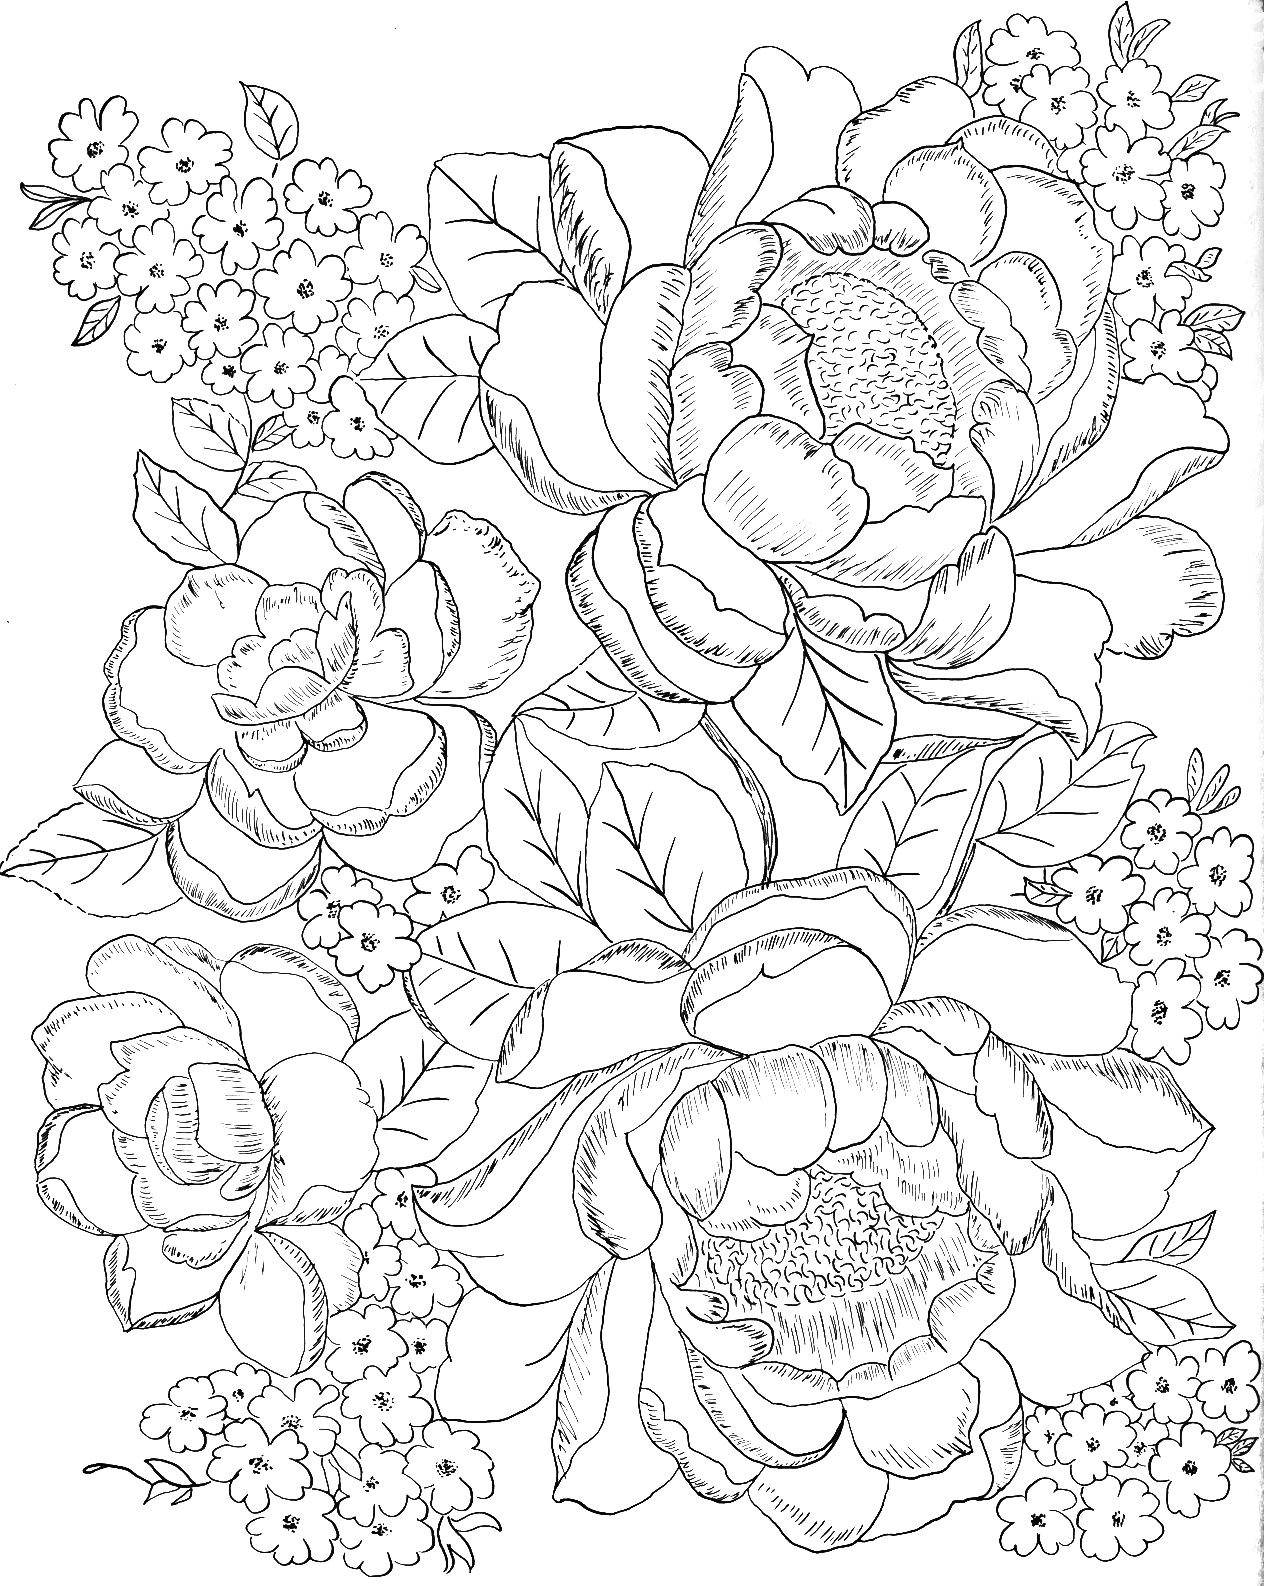 Download 23 Best Roses Coloring Pages for Adults - Home, Family ...